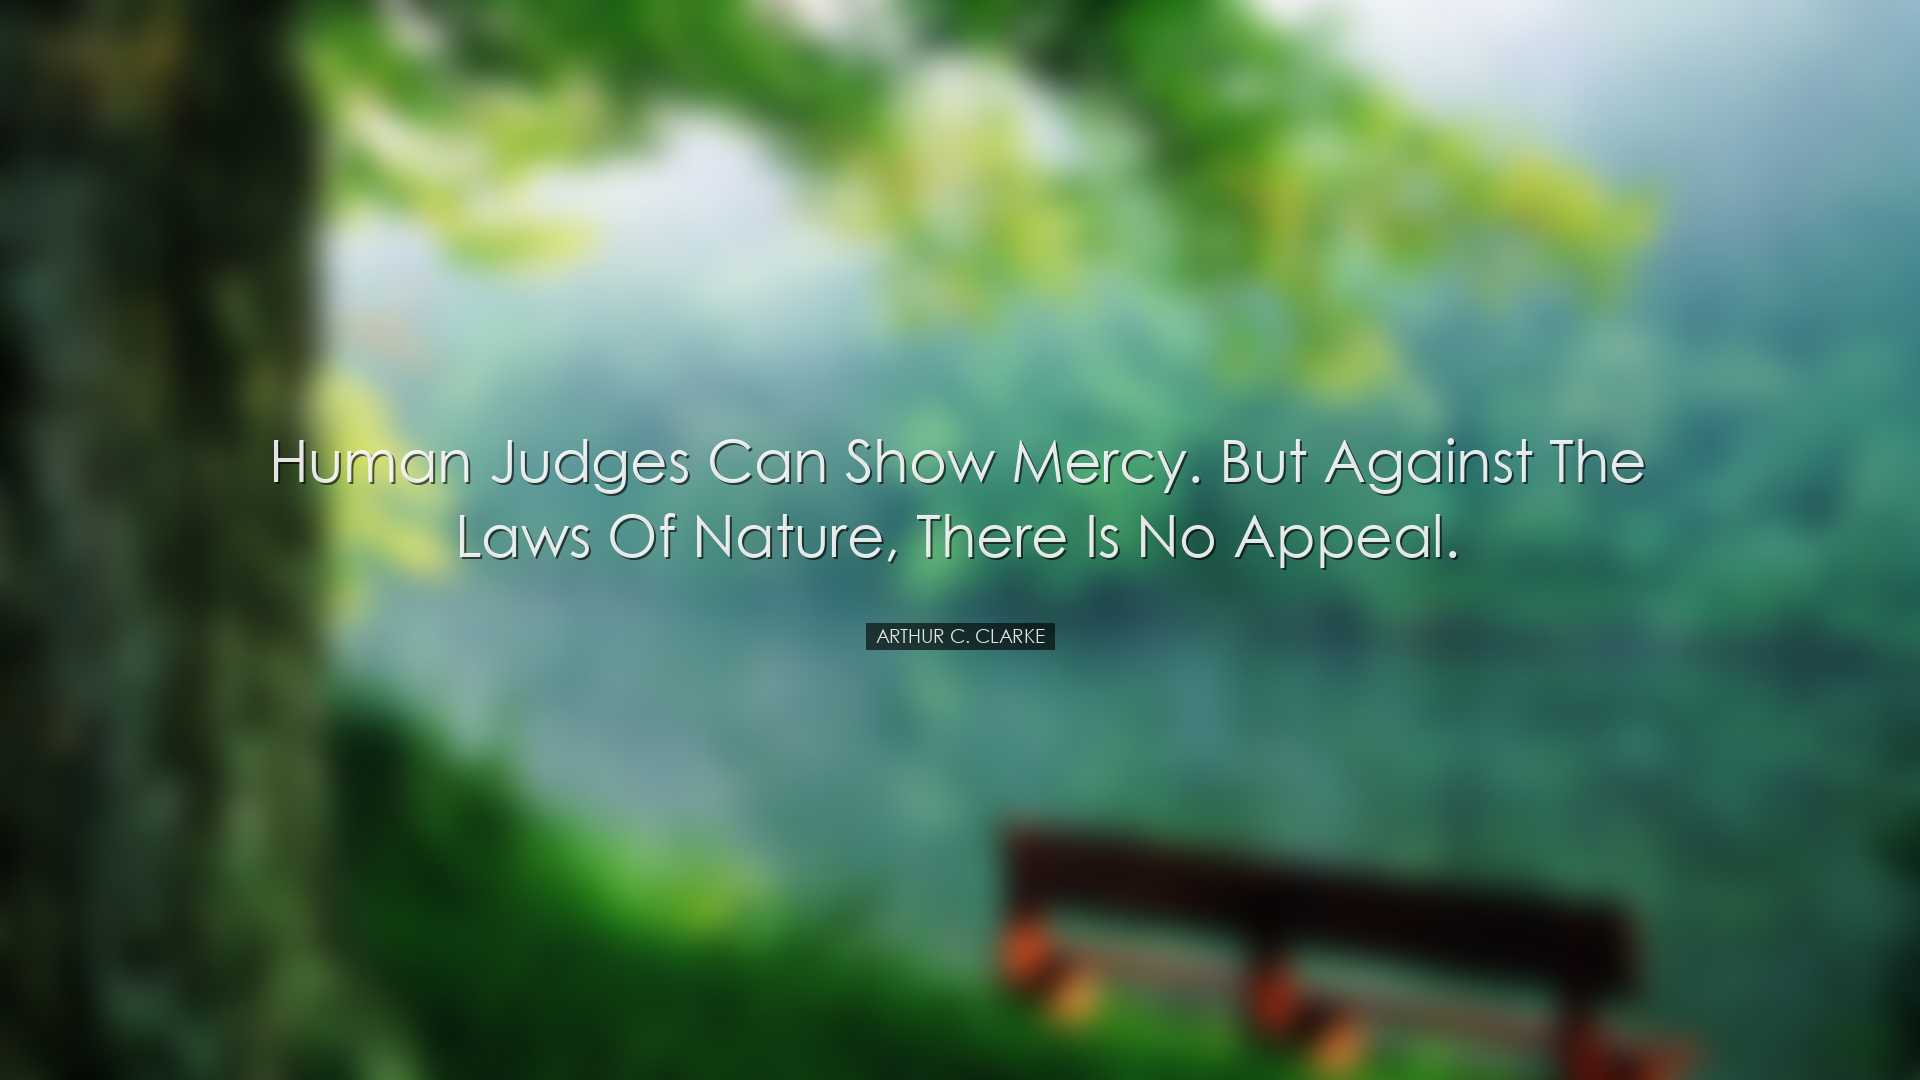 Human judges can show mercy. But against the laws of nature, there